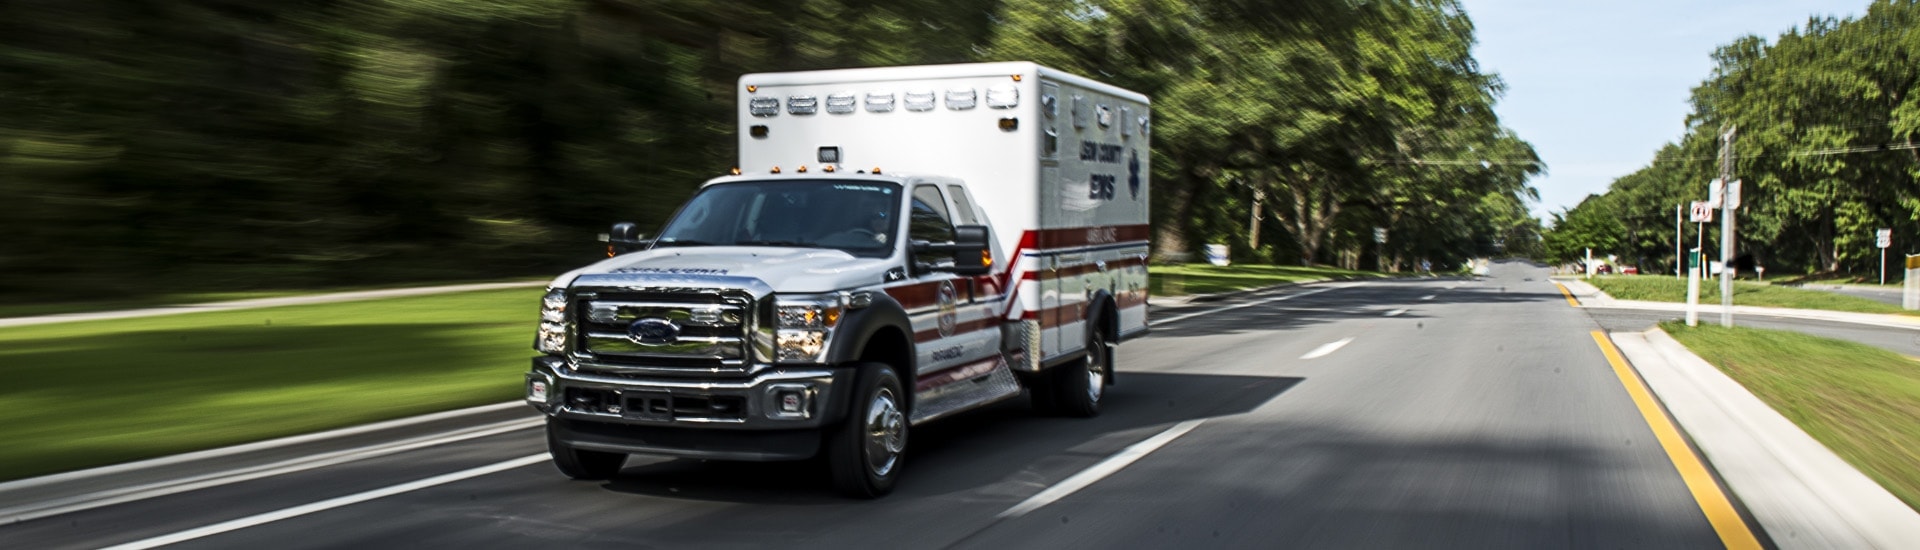  Leon County Emergency Medical Services